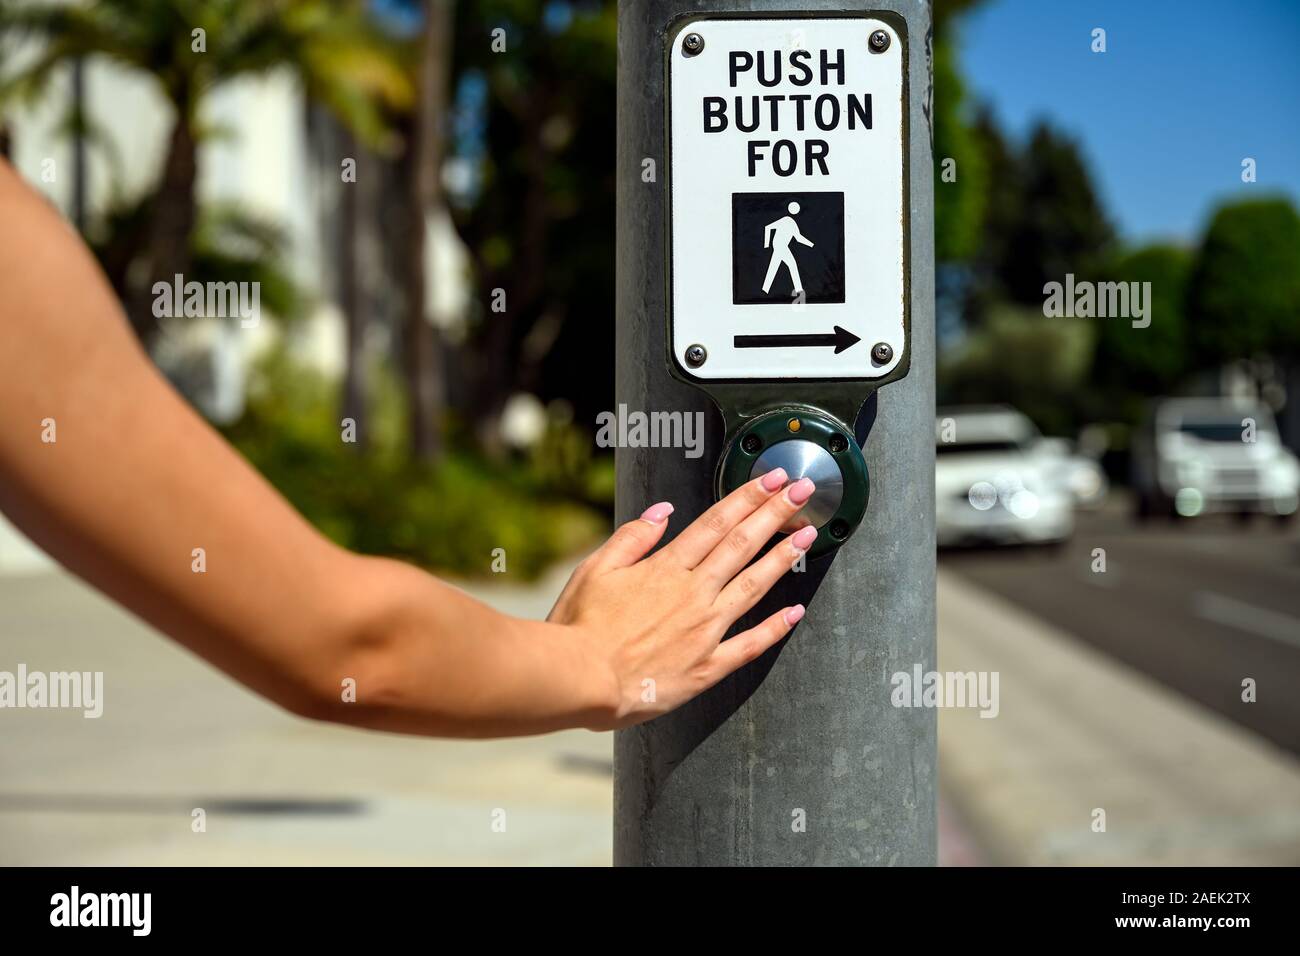 Push button to cross with sign, hand. Pedestrian crossing crosswalk. Female  pushing a button to stop car traffic in an intersection Stock Photo - Alamy